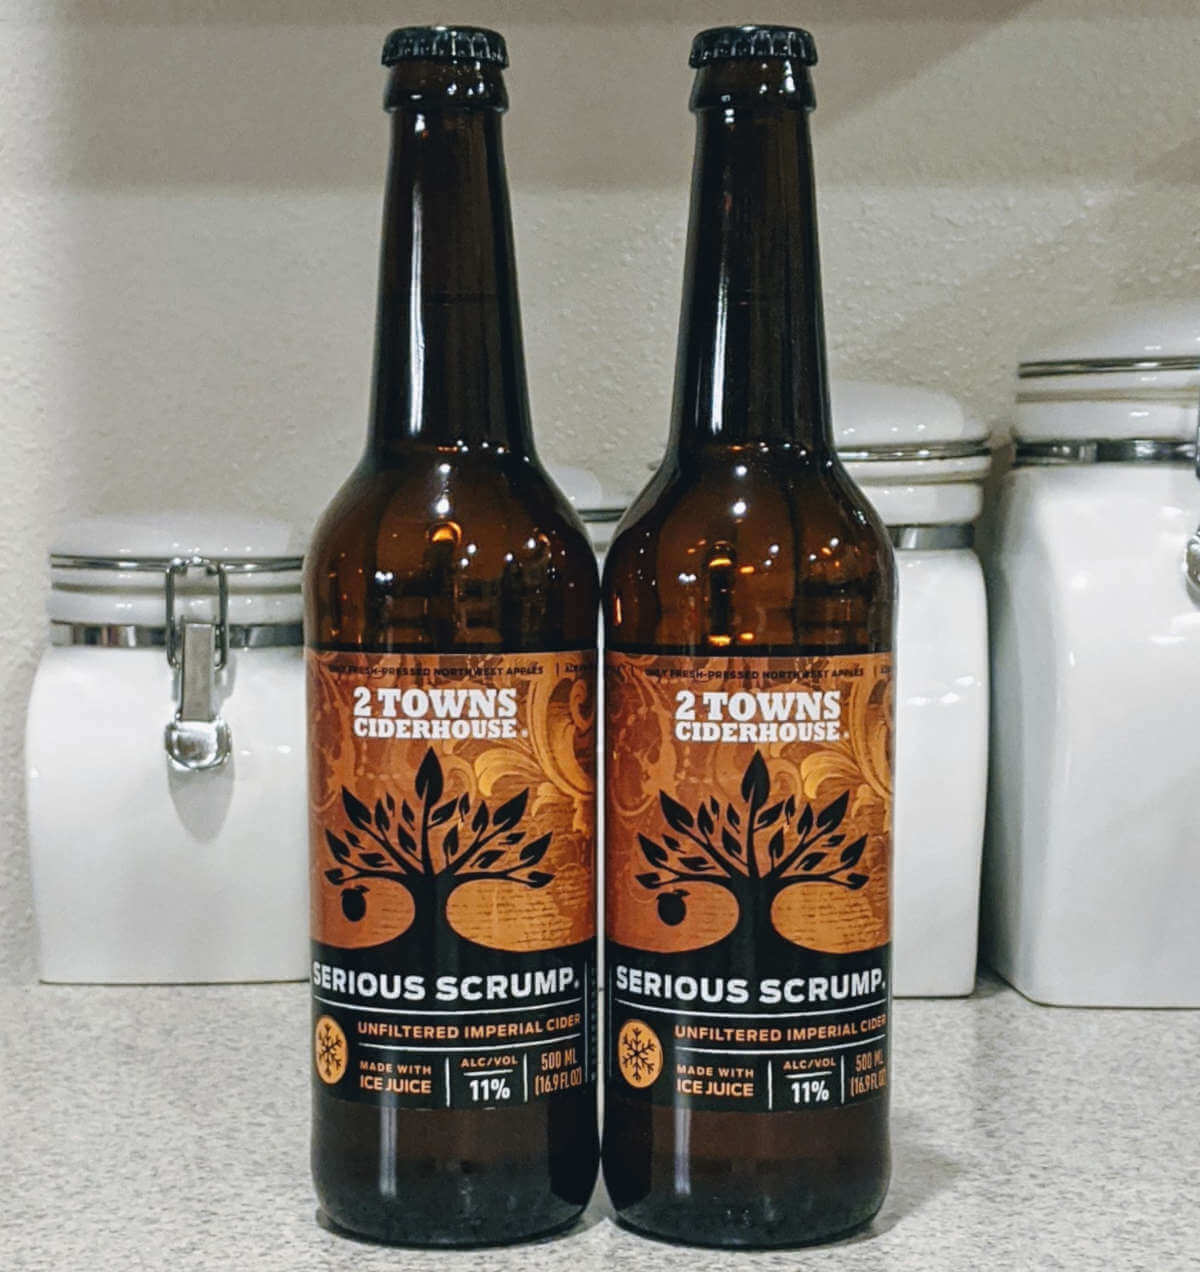 Received: 2 Towns Ciderhouse Serious Scrump